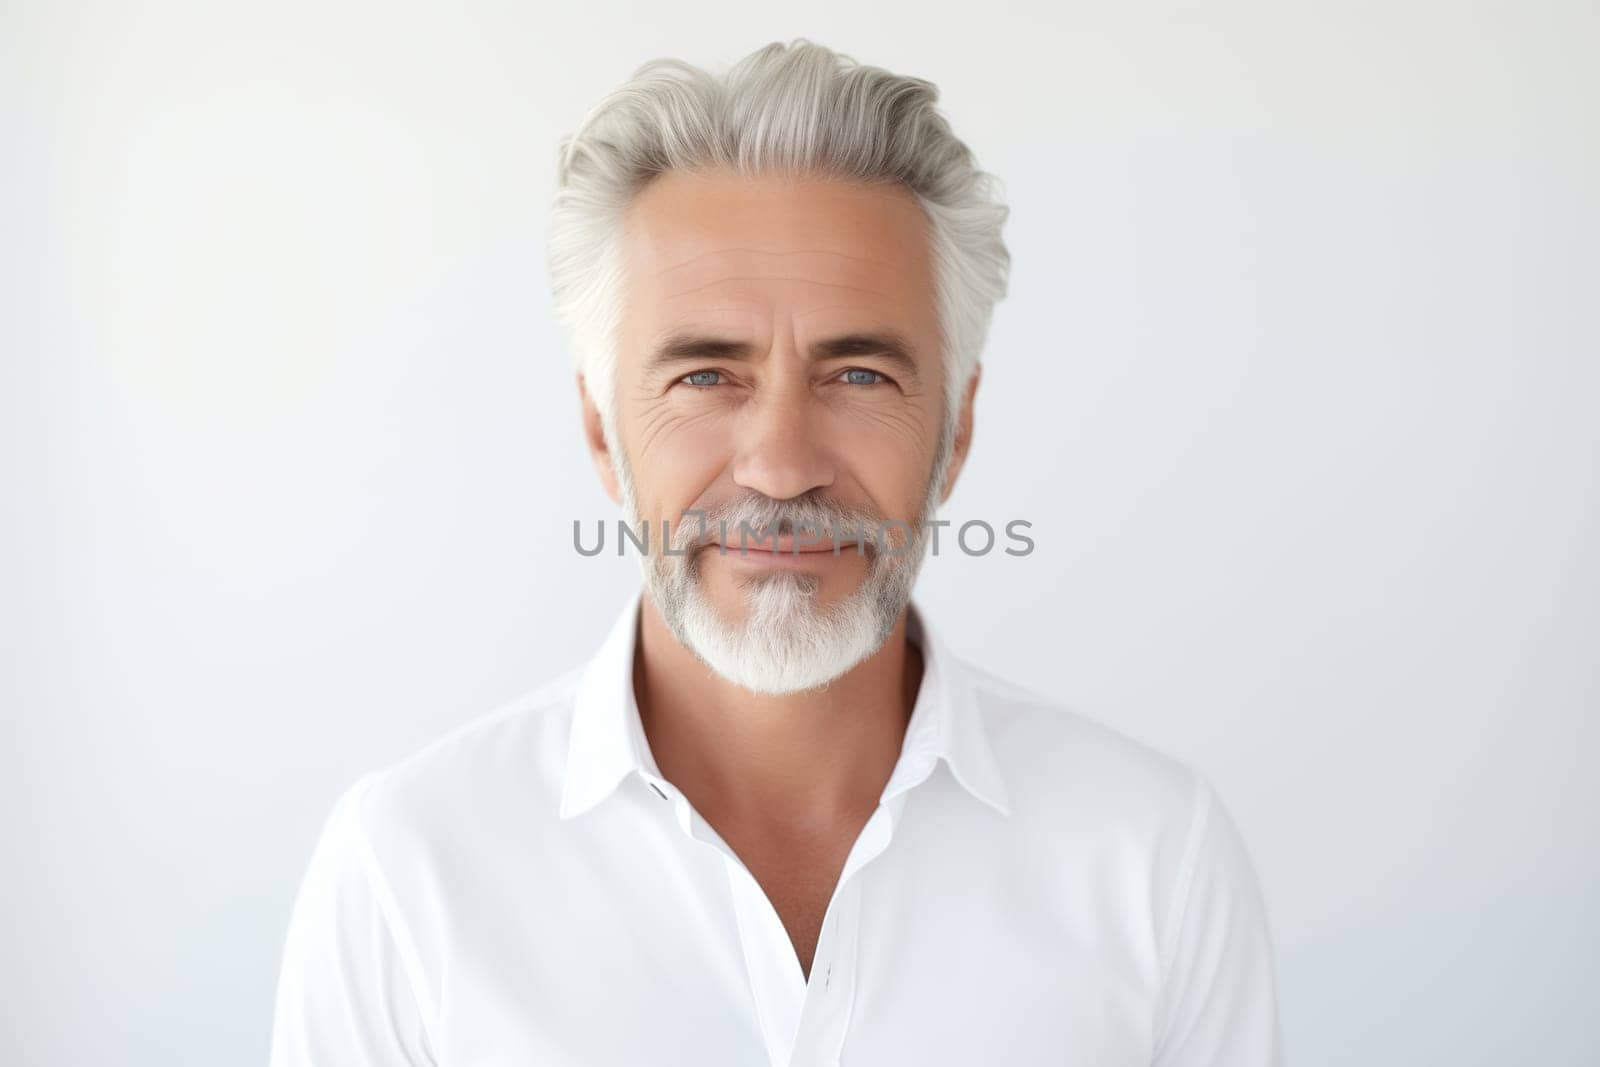 Portrait of handsome happy smiling mature man with toothy smile, gray hair, bearded, looking at camera on white studio background